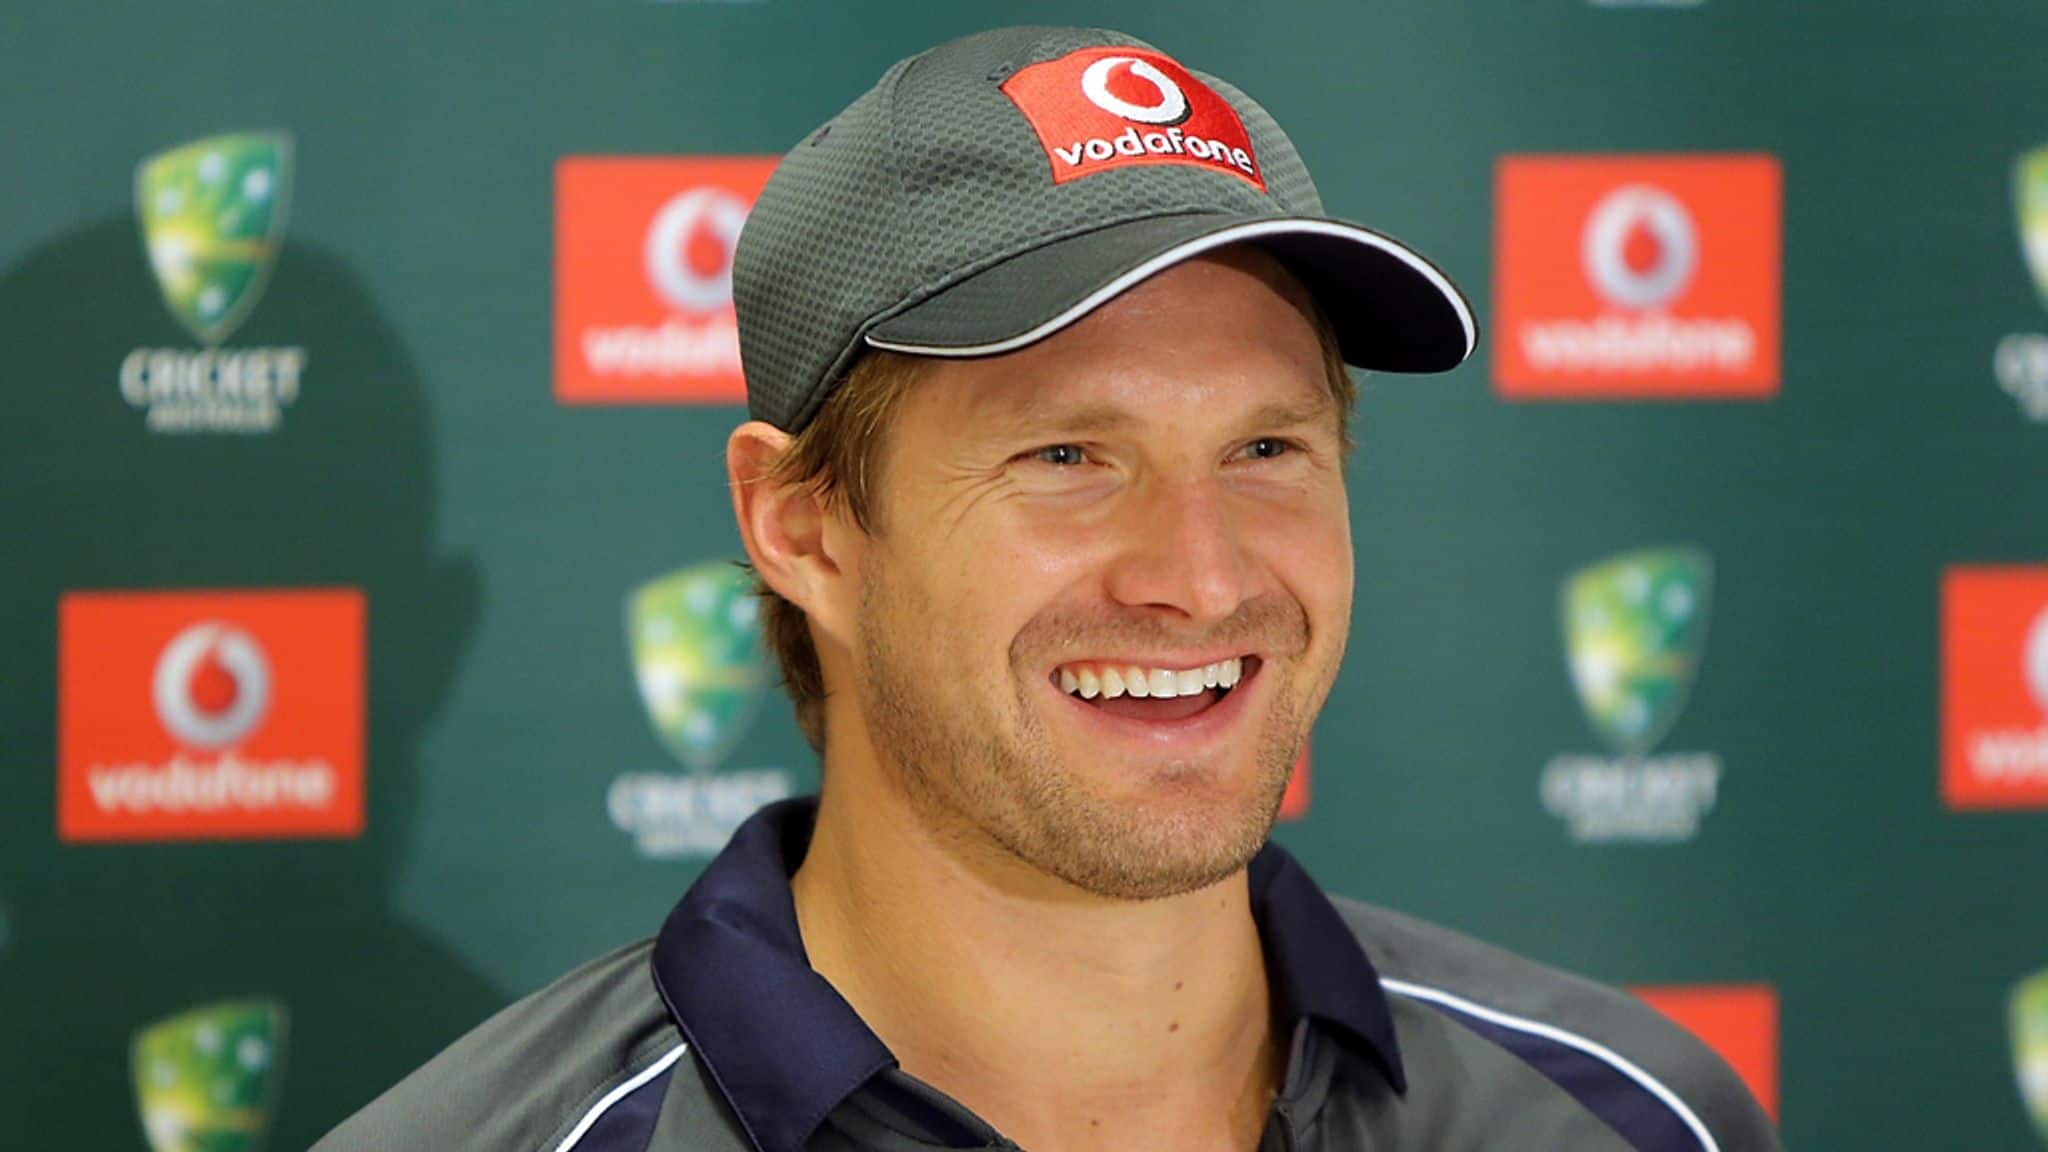 Shane Watson extends warm wishes to Aaron Finch on his successful ODI career